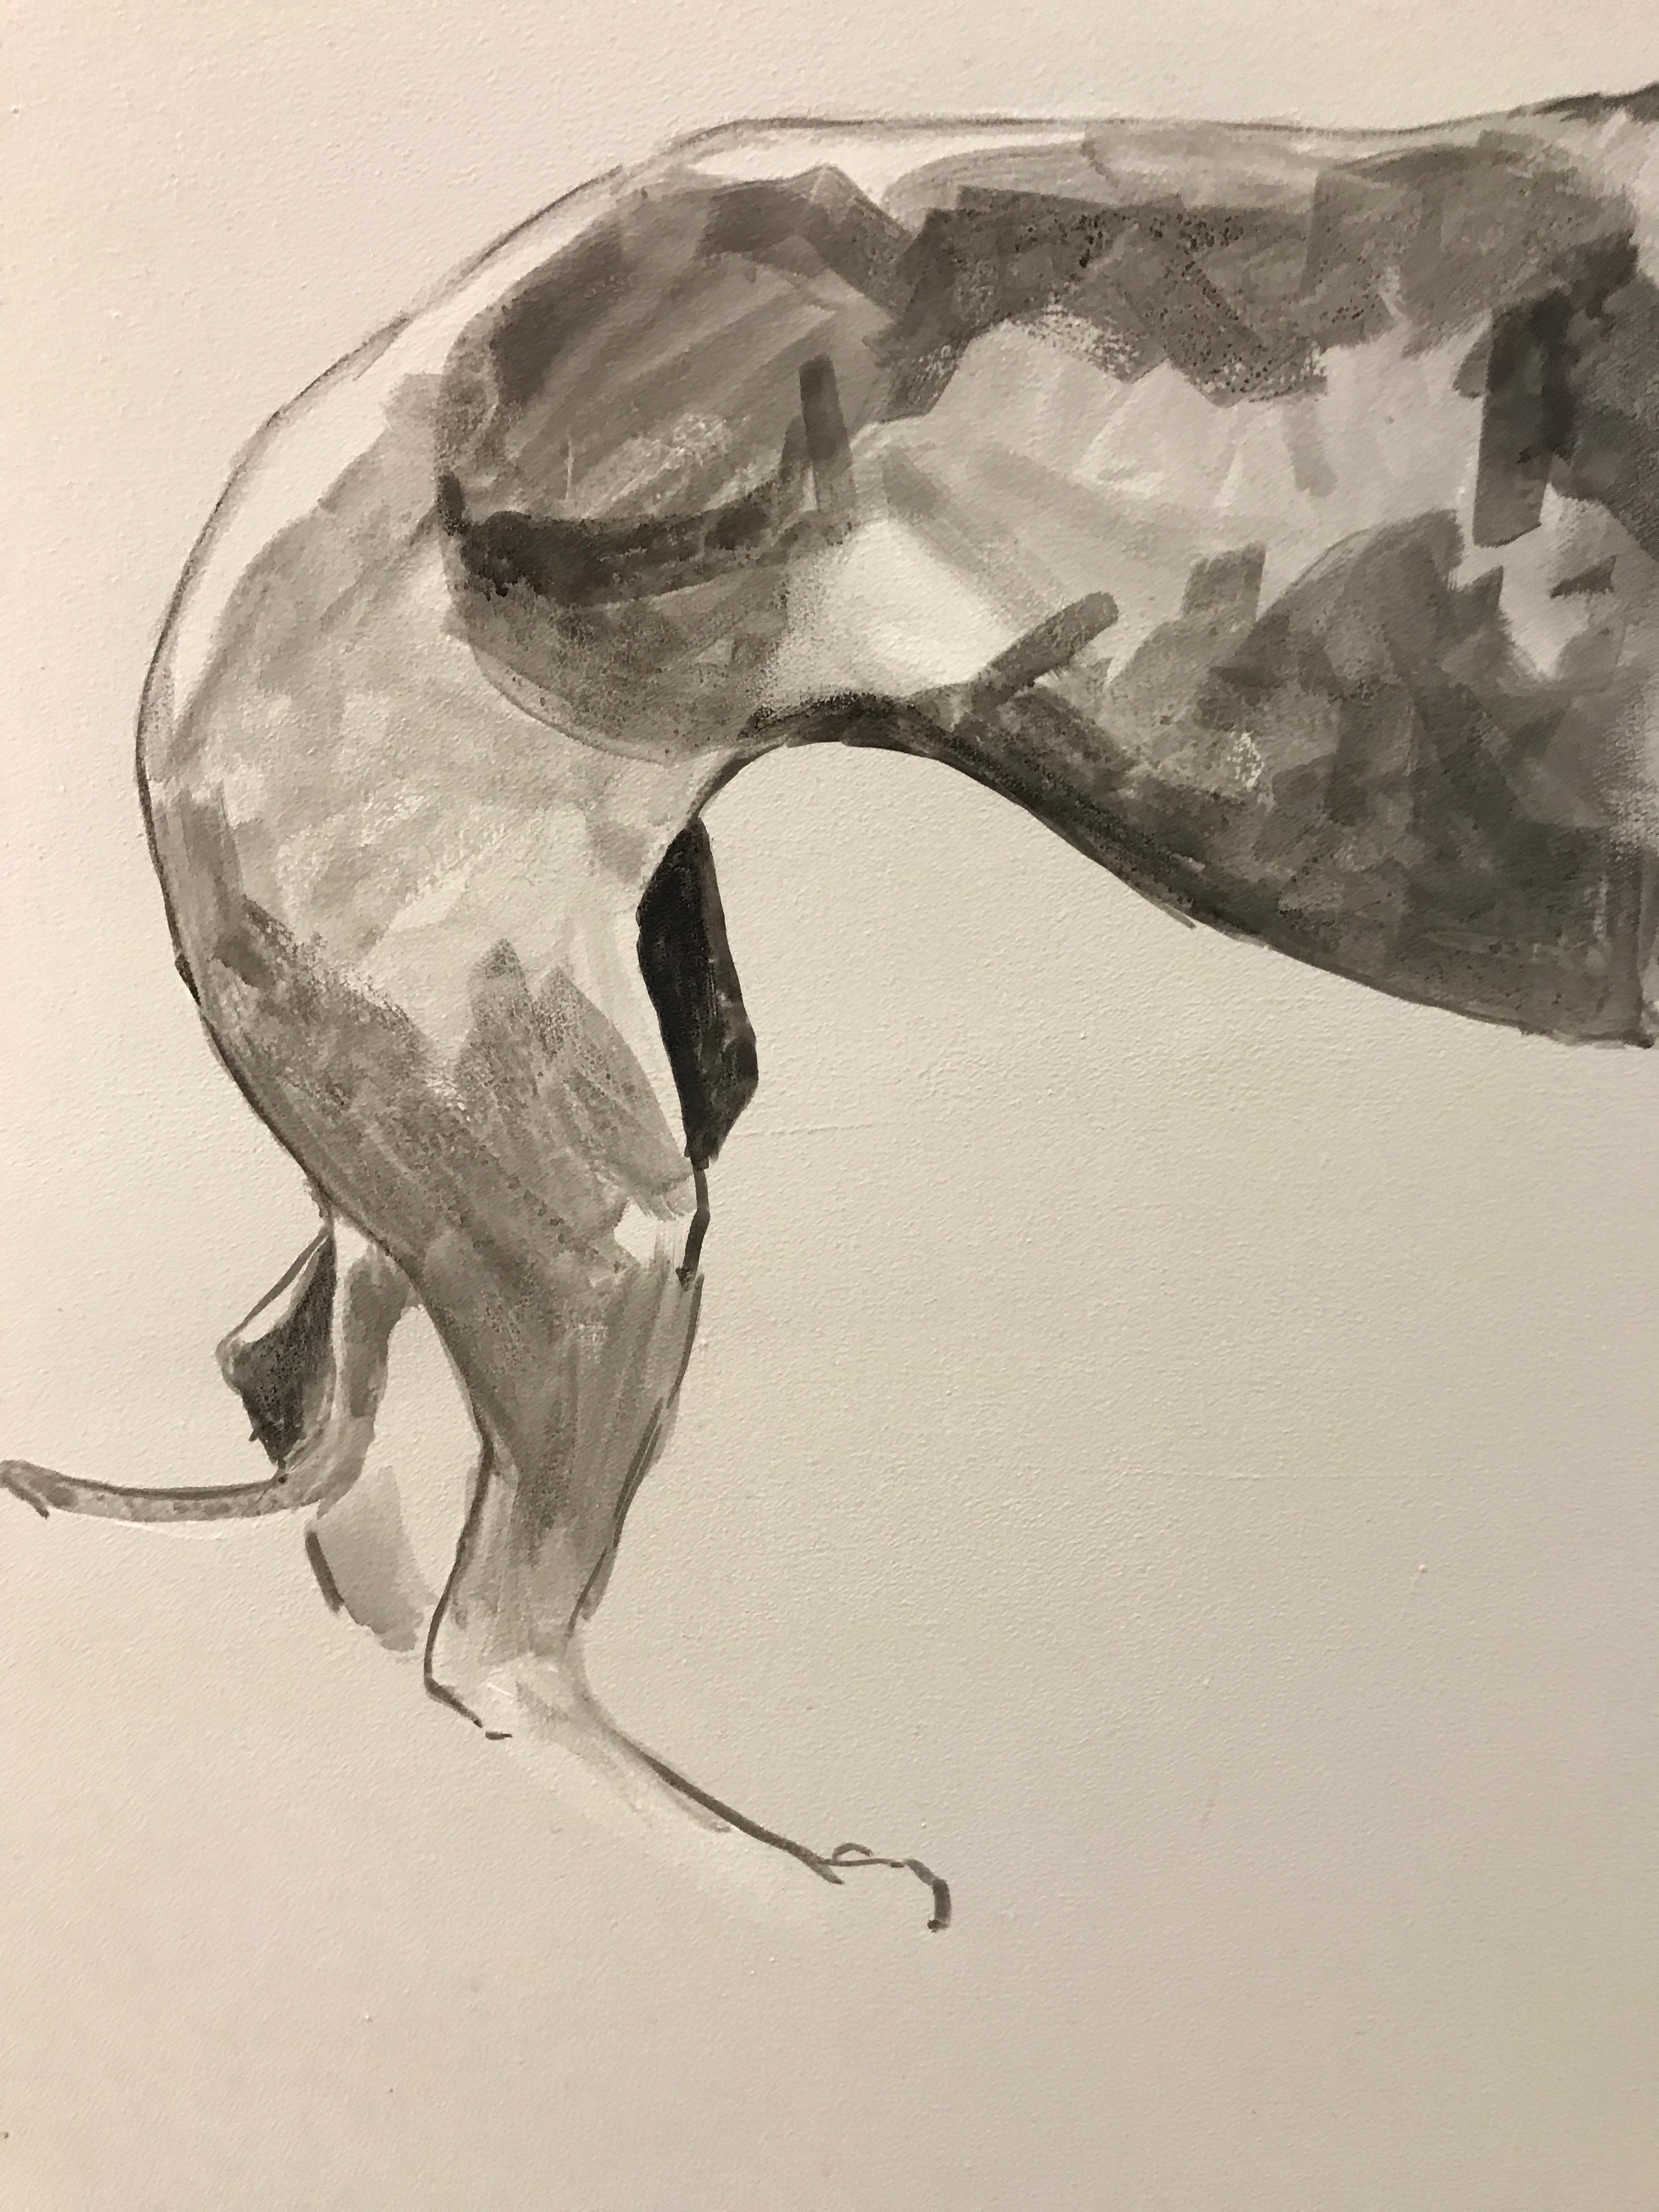 Whippet, This stunning large minimalist black and white painting of a Whippet dog, is a contemporary portrait in acrylic on canvas.  Ian Mason's portraits of dogs are very striking as he is able to capture the form of each dog breed with minimal